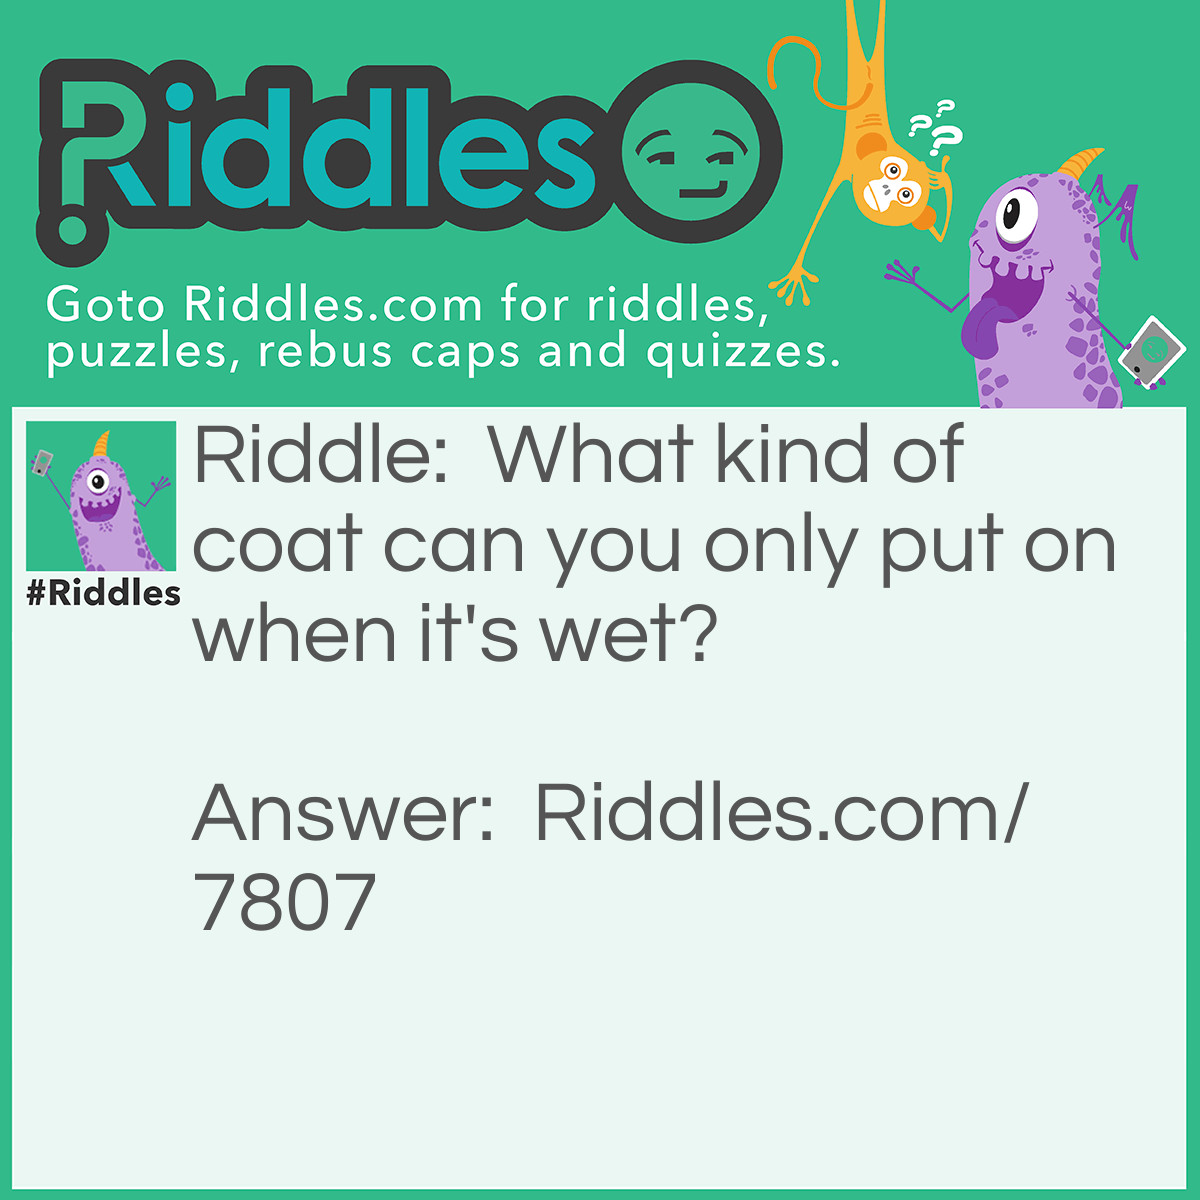 Riddle: What kind of coat can you only put on when it's wet? Answer: A Coat of Paint.